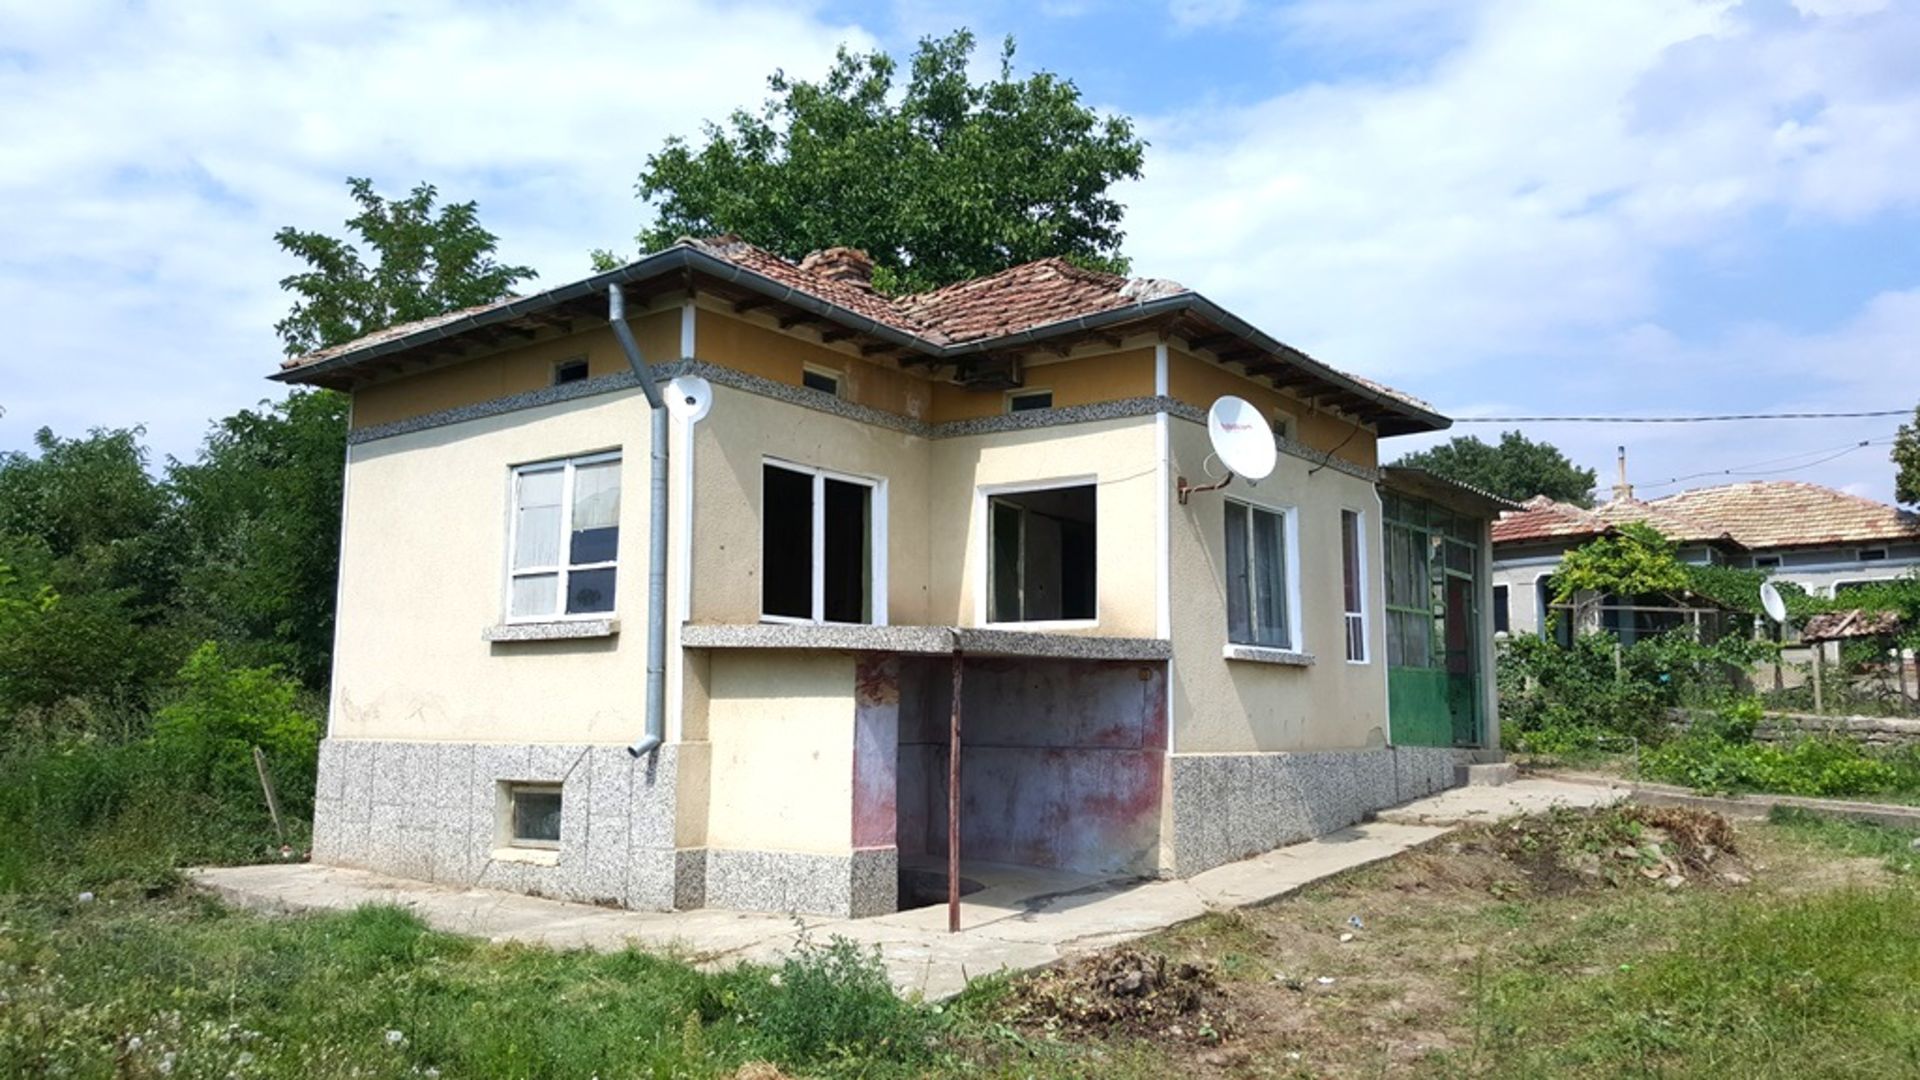 Sunny Bulgarian cottage 30 miles from beaches   Here is a great opportunity to snap up a well- - Image 4 of 26